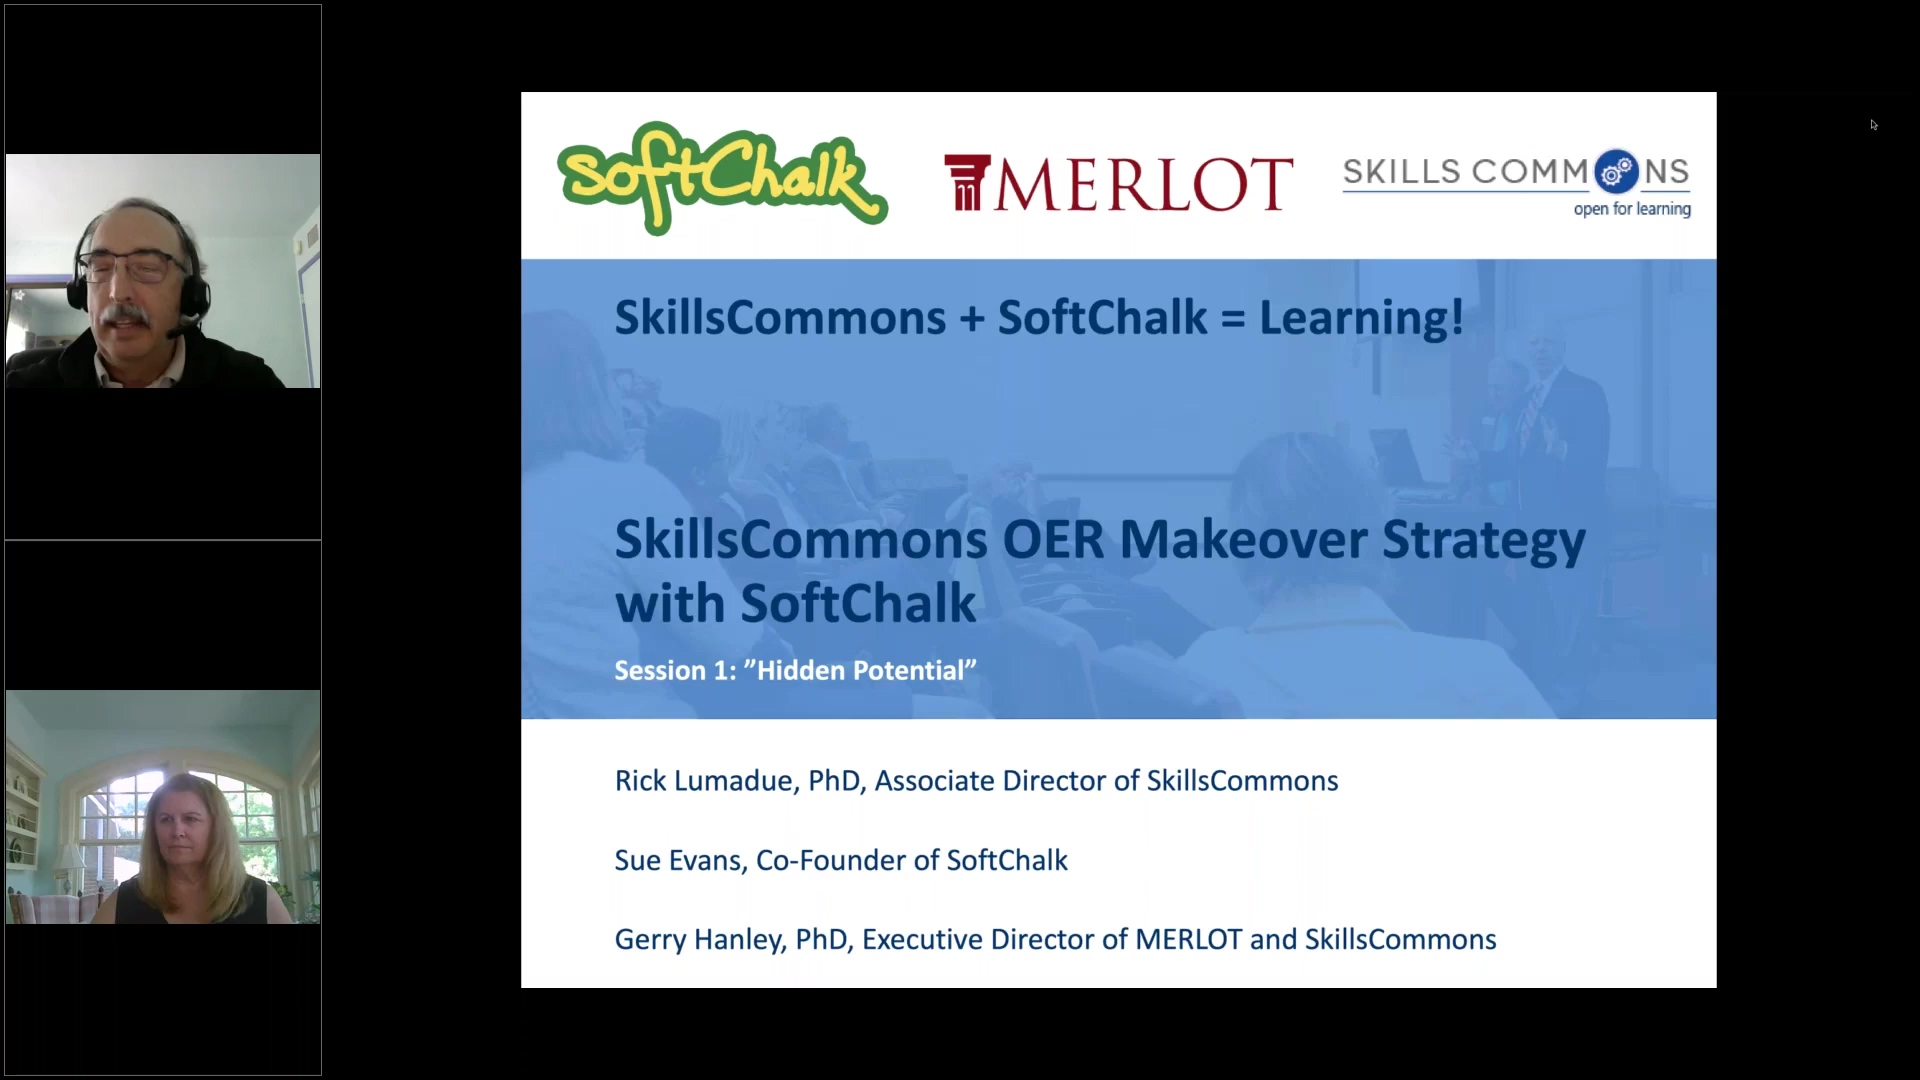 SkillsCommons OER Makeover Strategy with SoftChalk